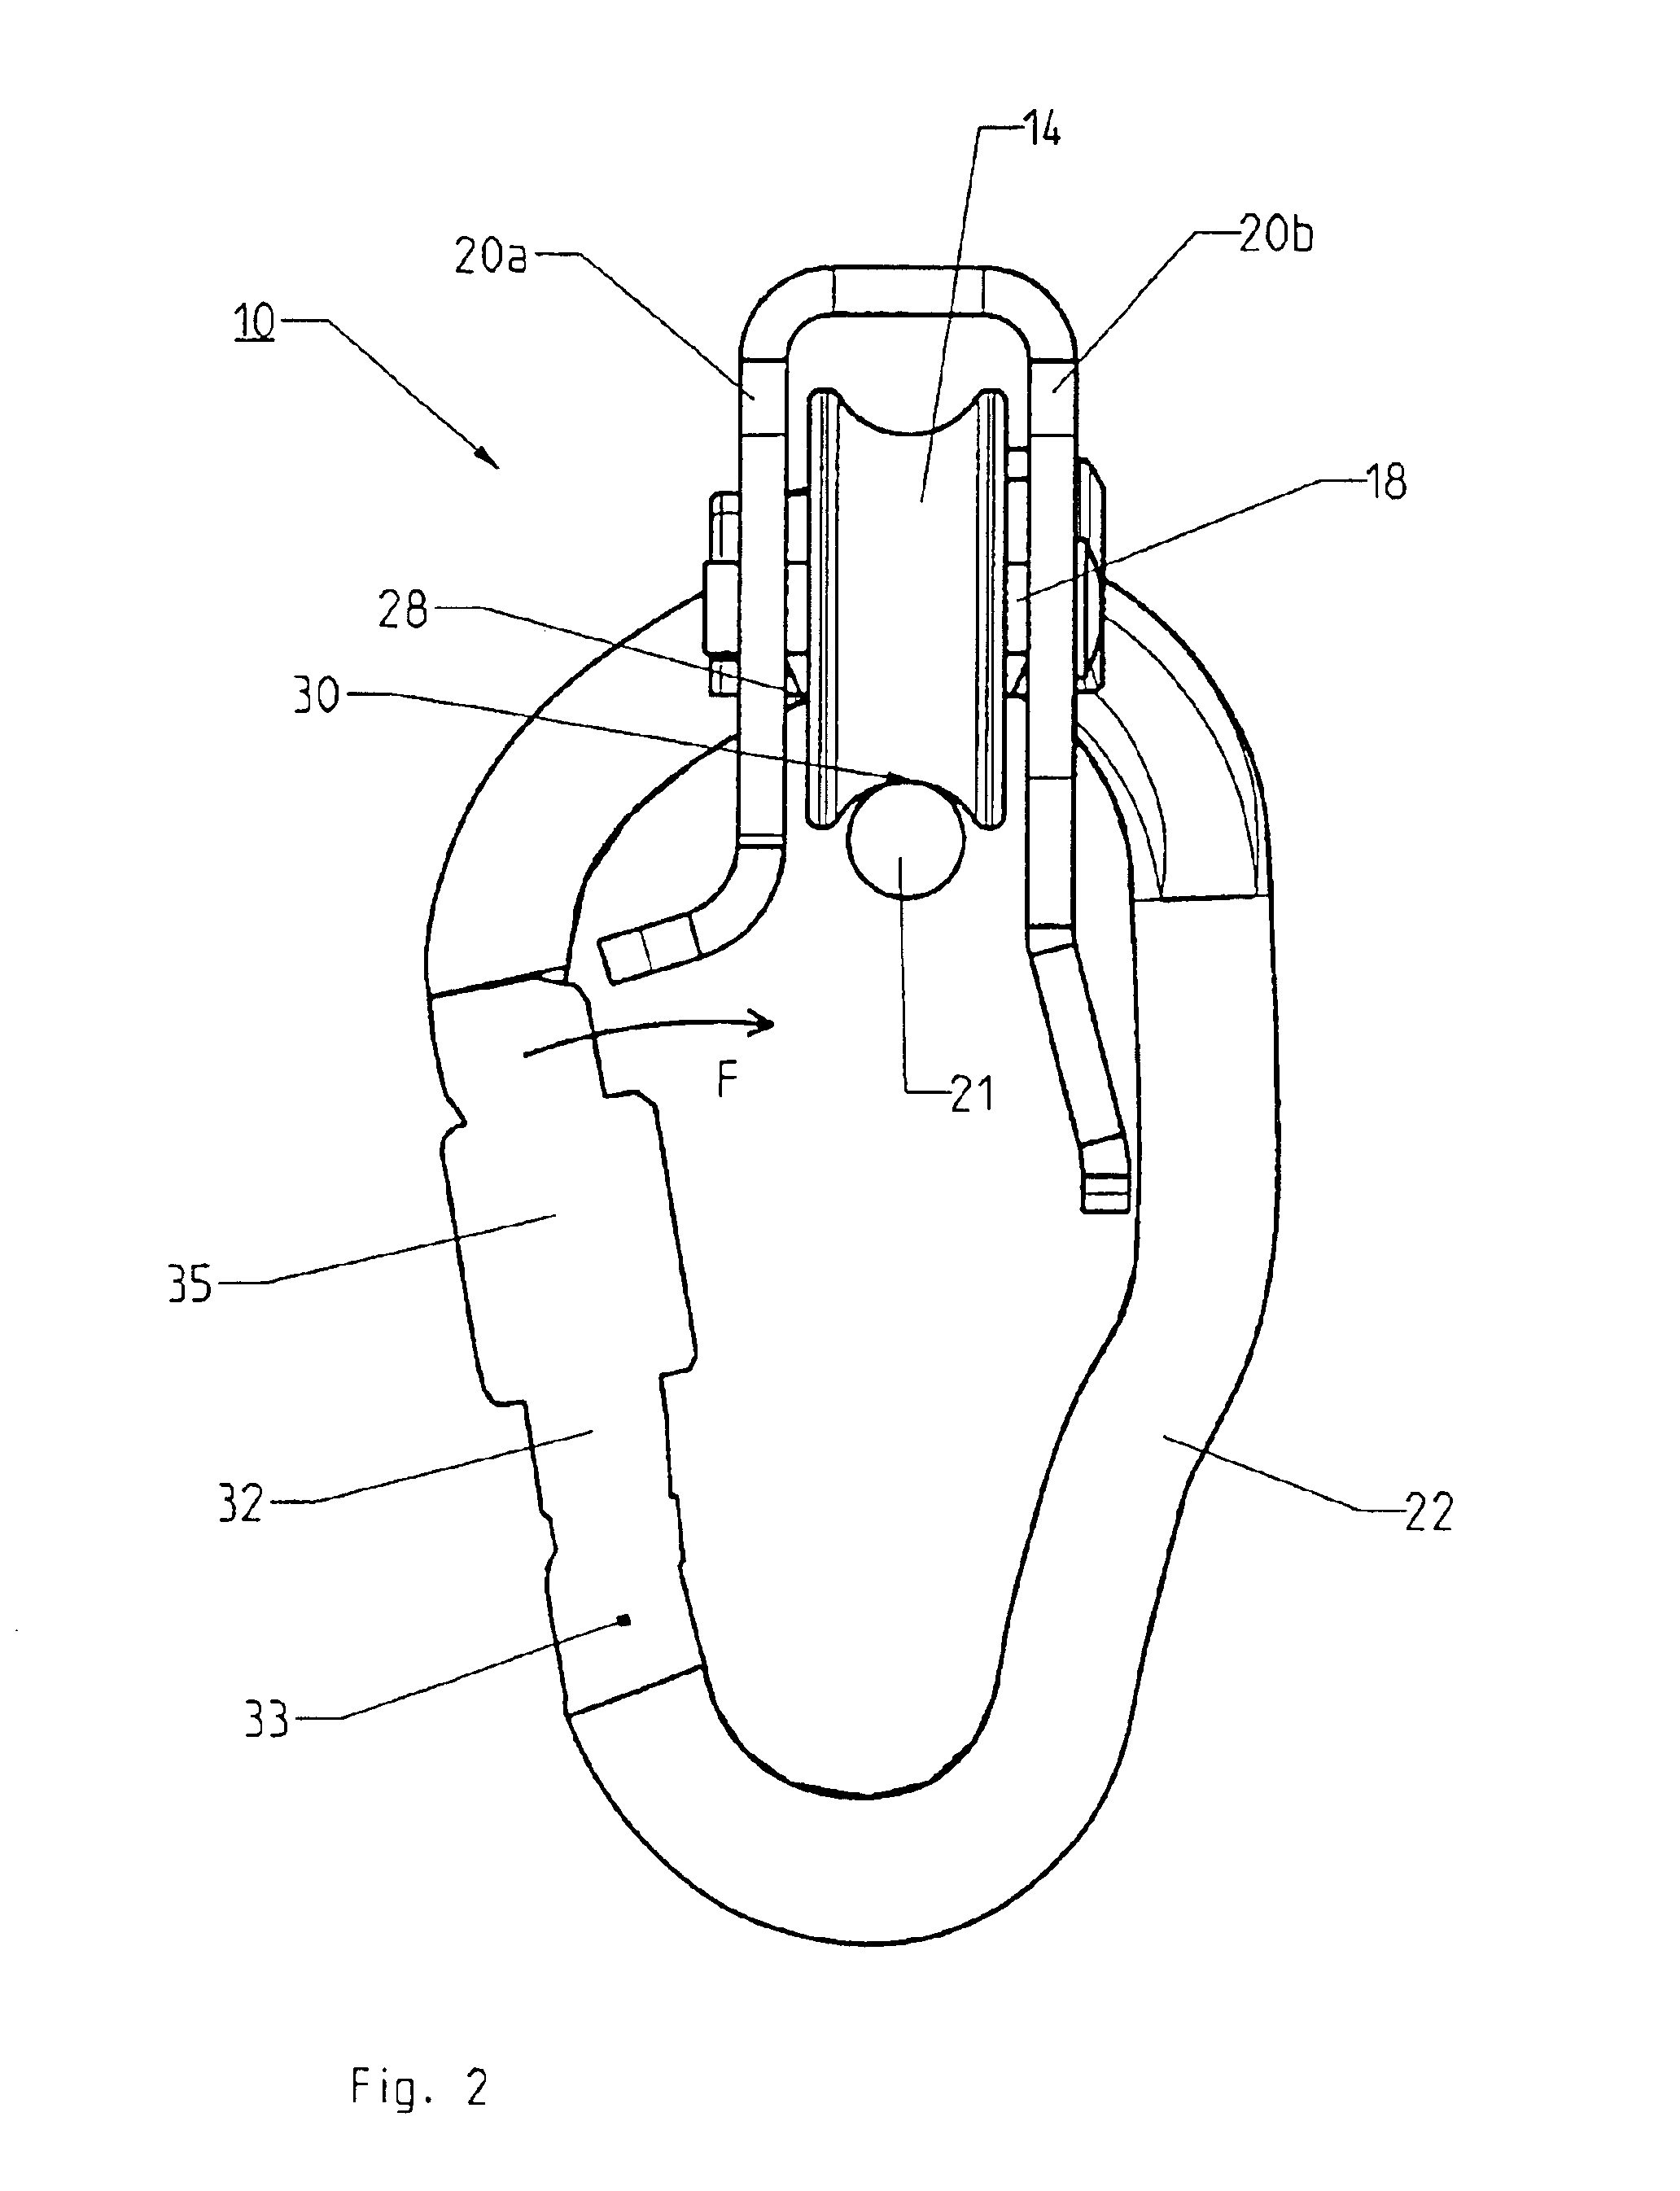 Double pulley device for use for zip-line traversing on a rope or cable